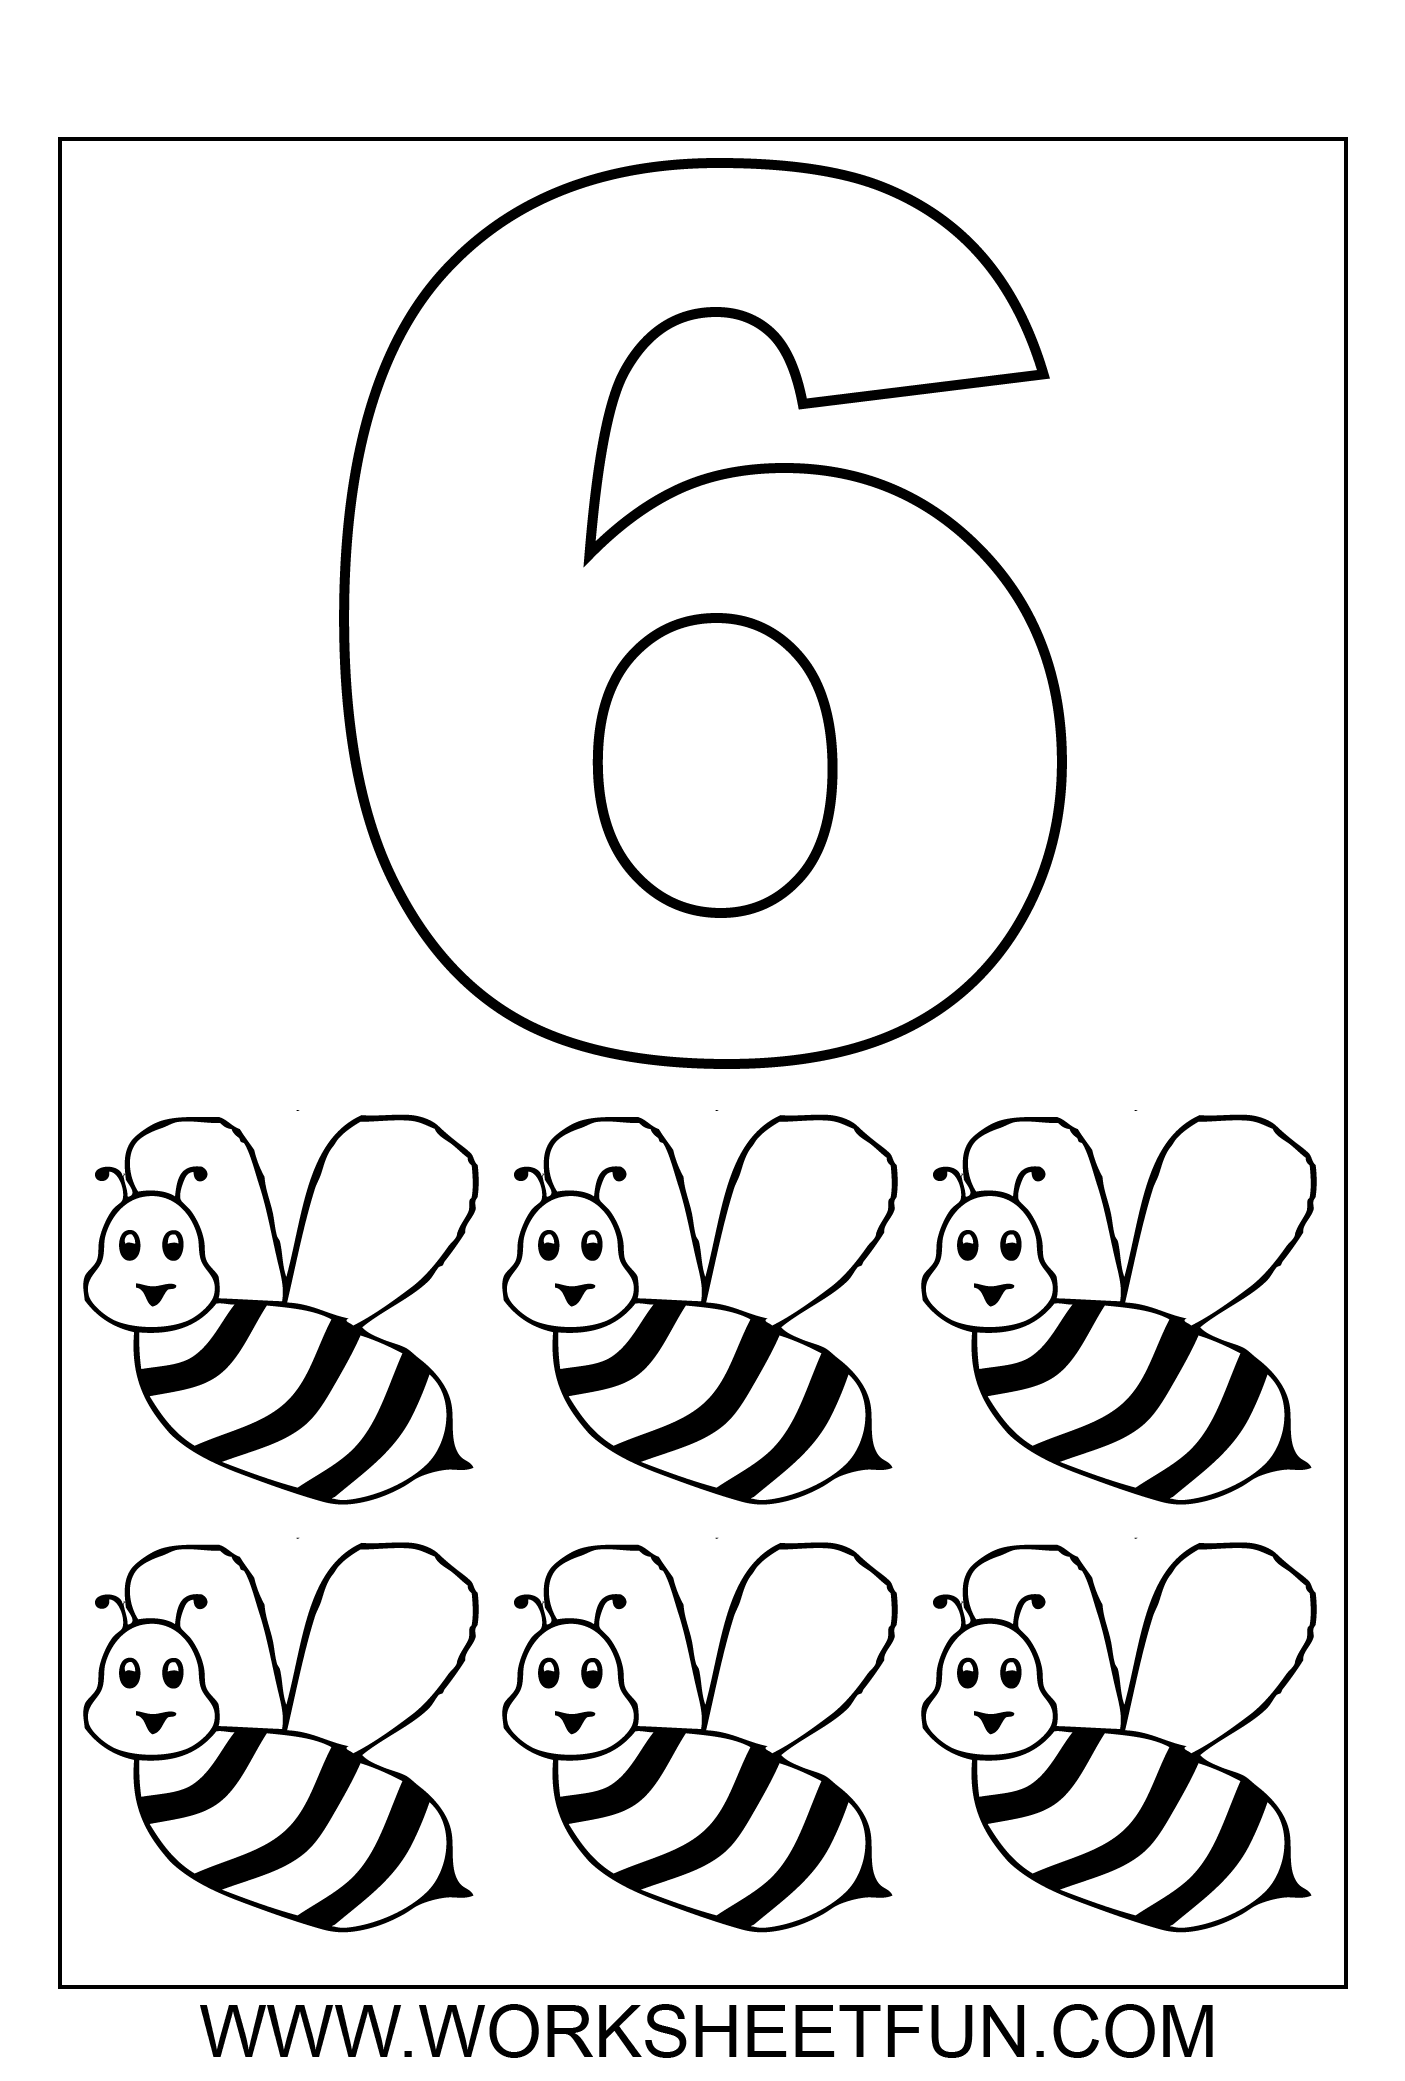 Number Coloring Pages 1 - 10 Worksheets / FREE Printable ...